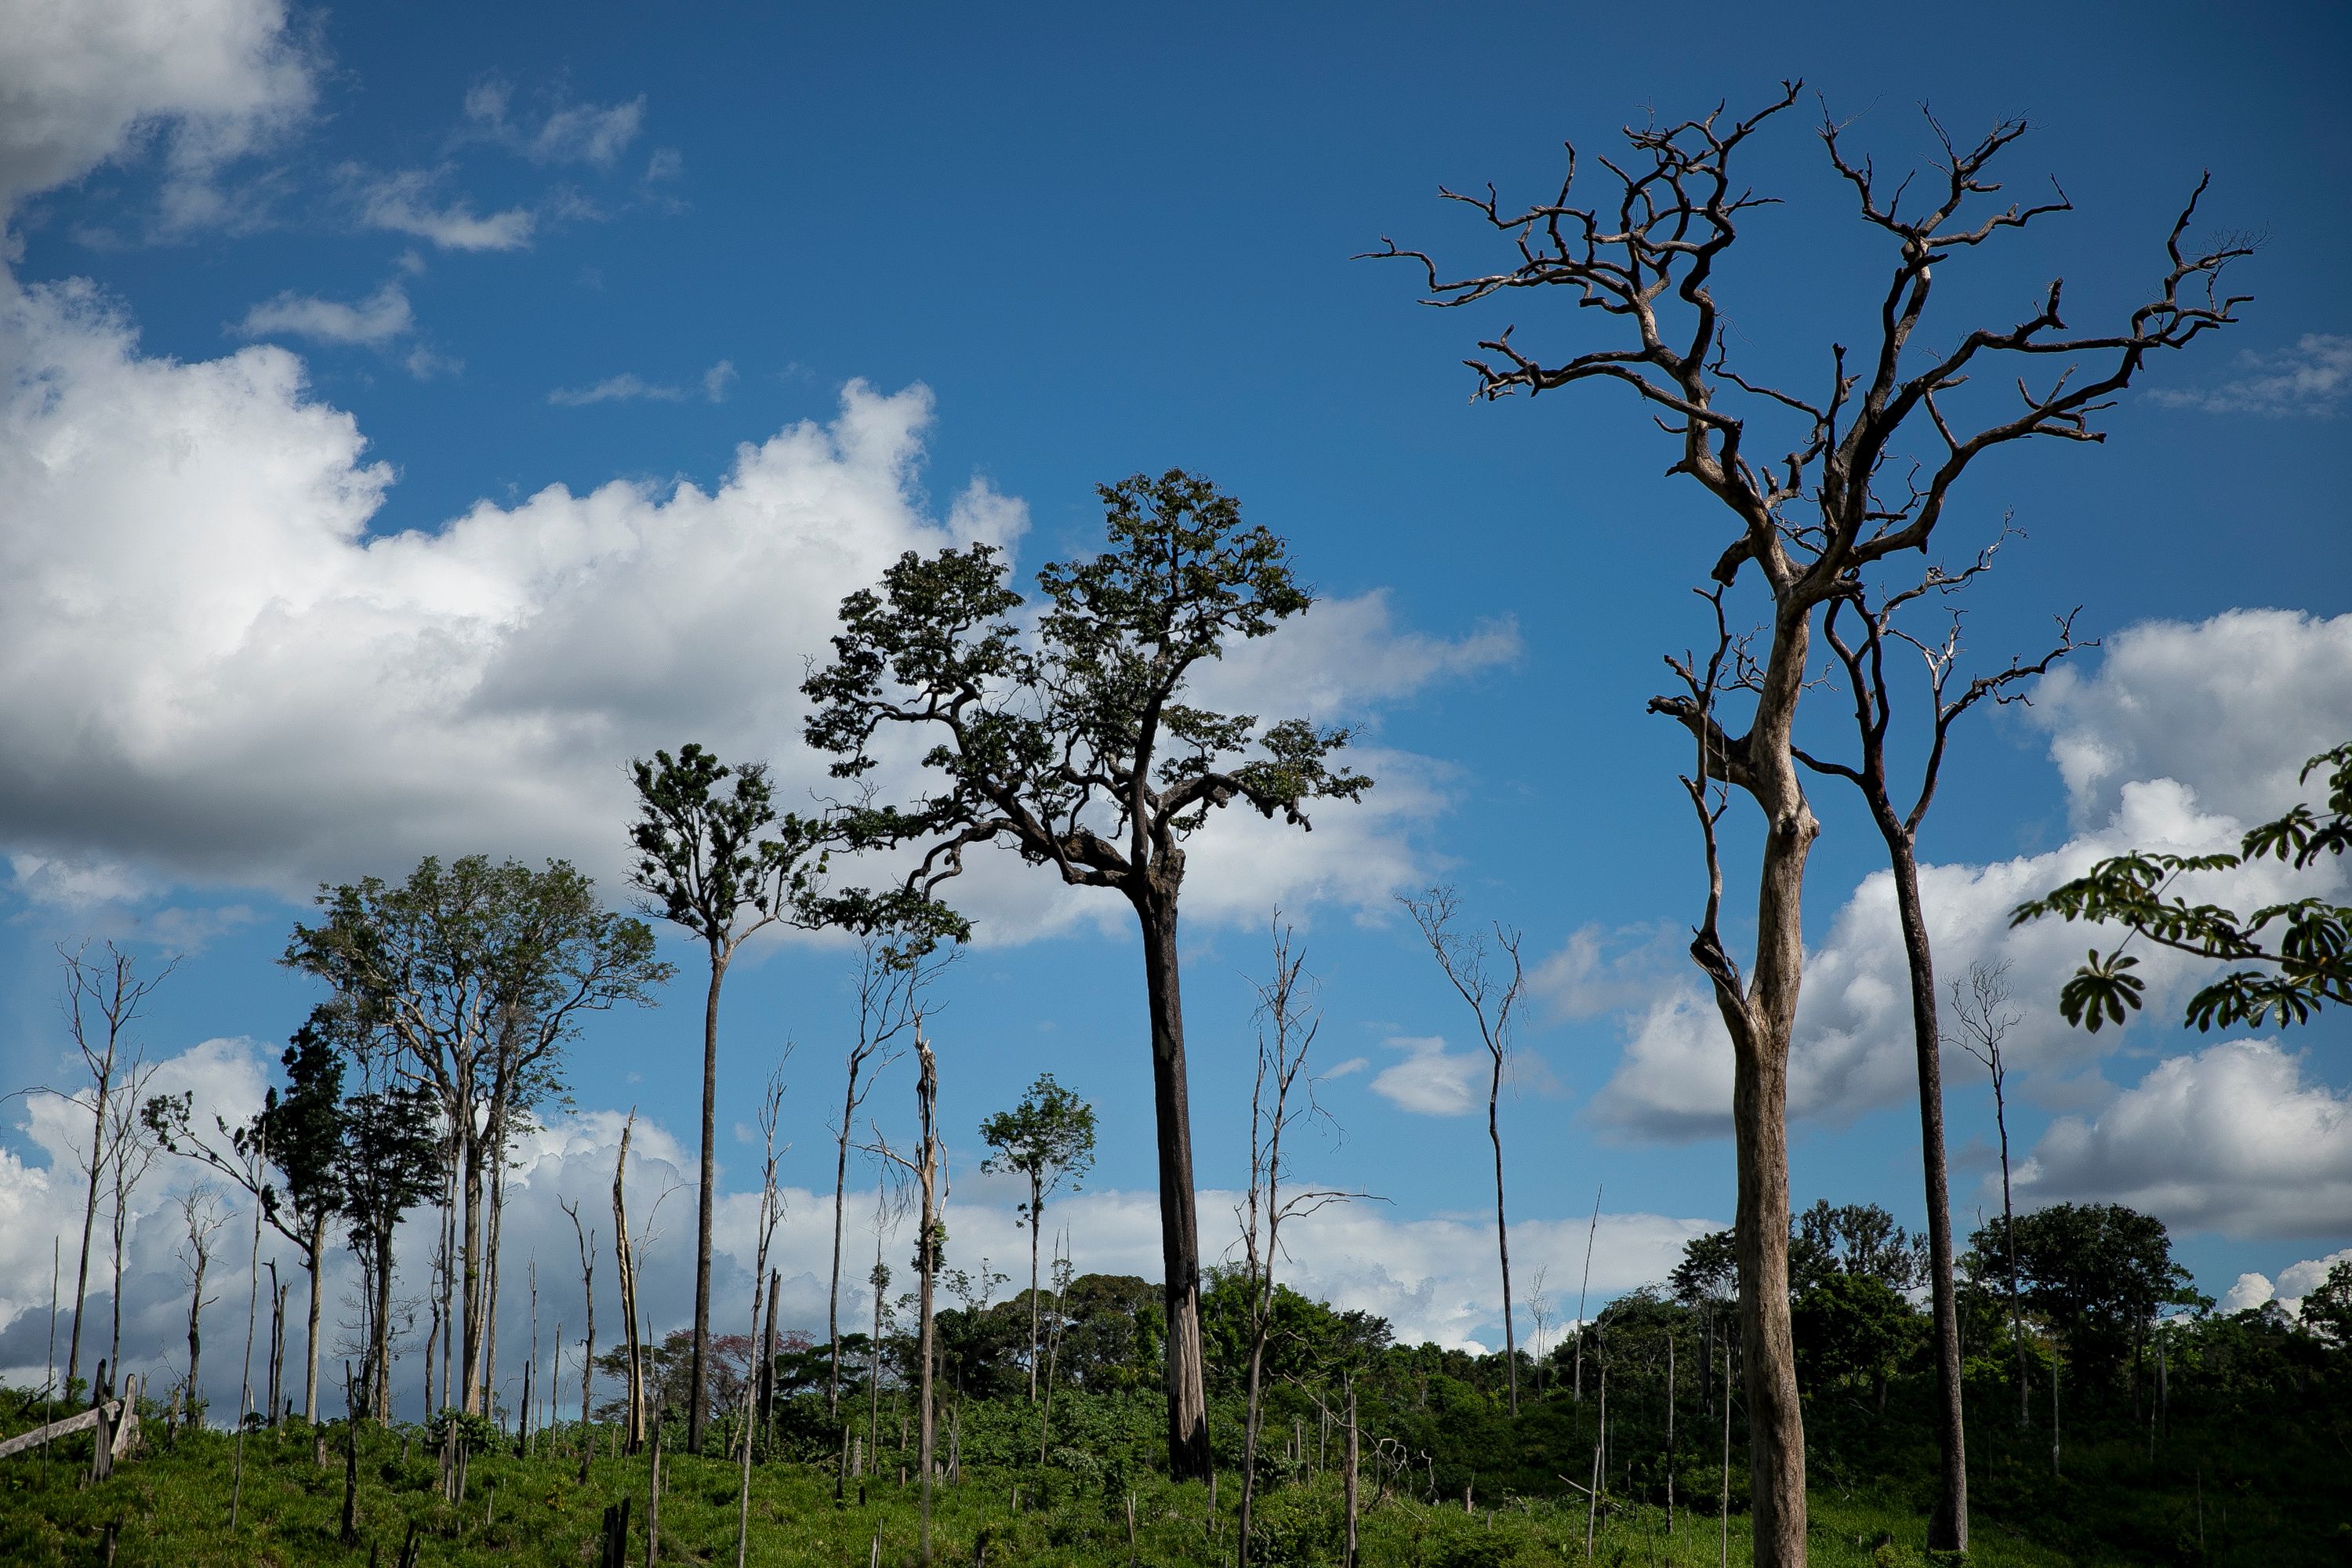 Trees that escaped clearcutting in the forest in Anapu. Image by Spenser Heaps. Brazil, 2019.